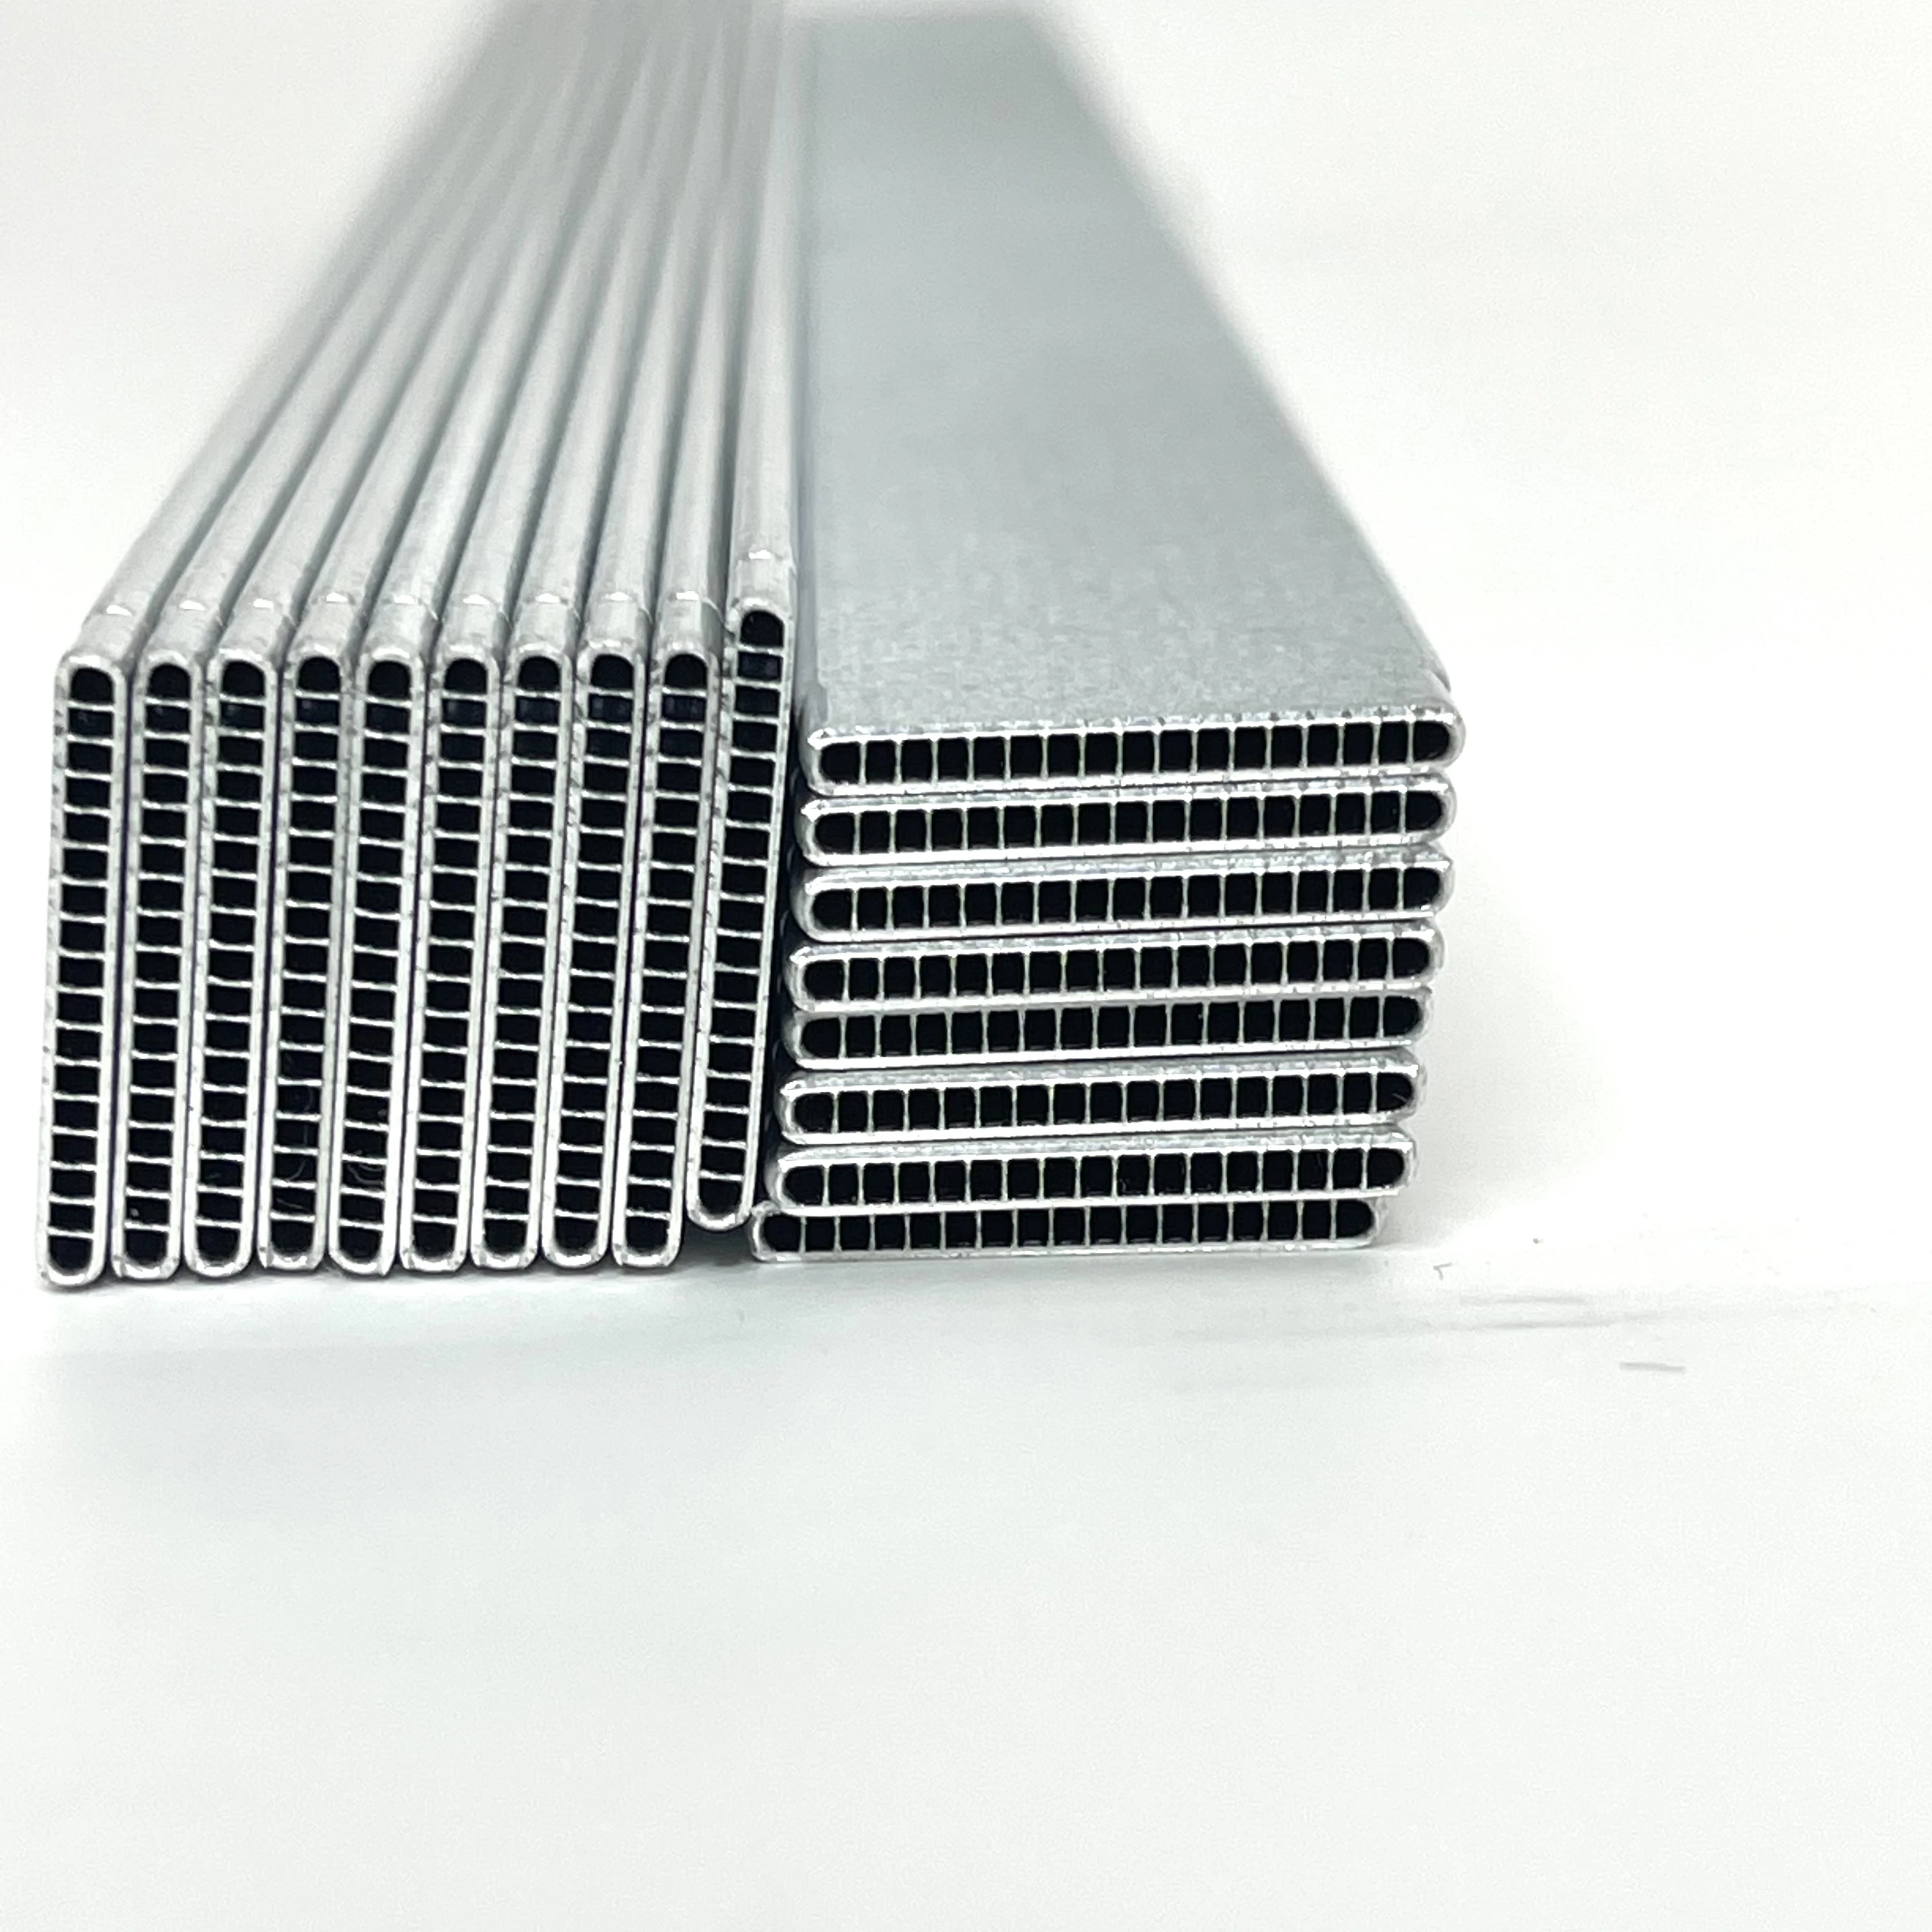 Aluminum Extruded Microchannel Flat Tubes for Aluminum Heat Exchangers